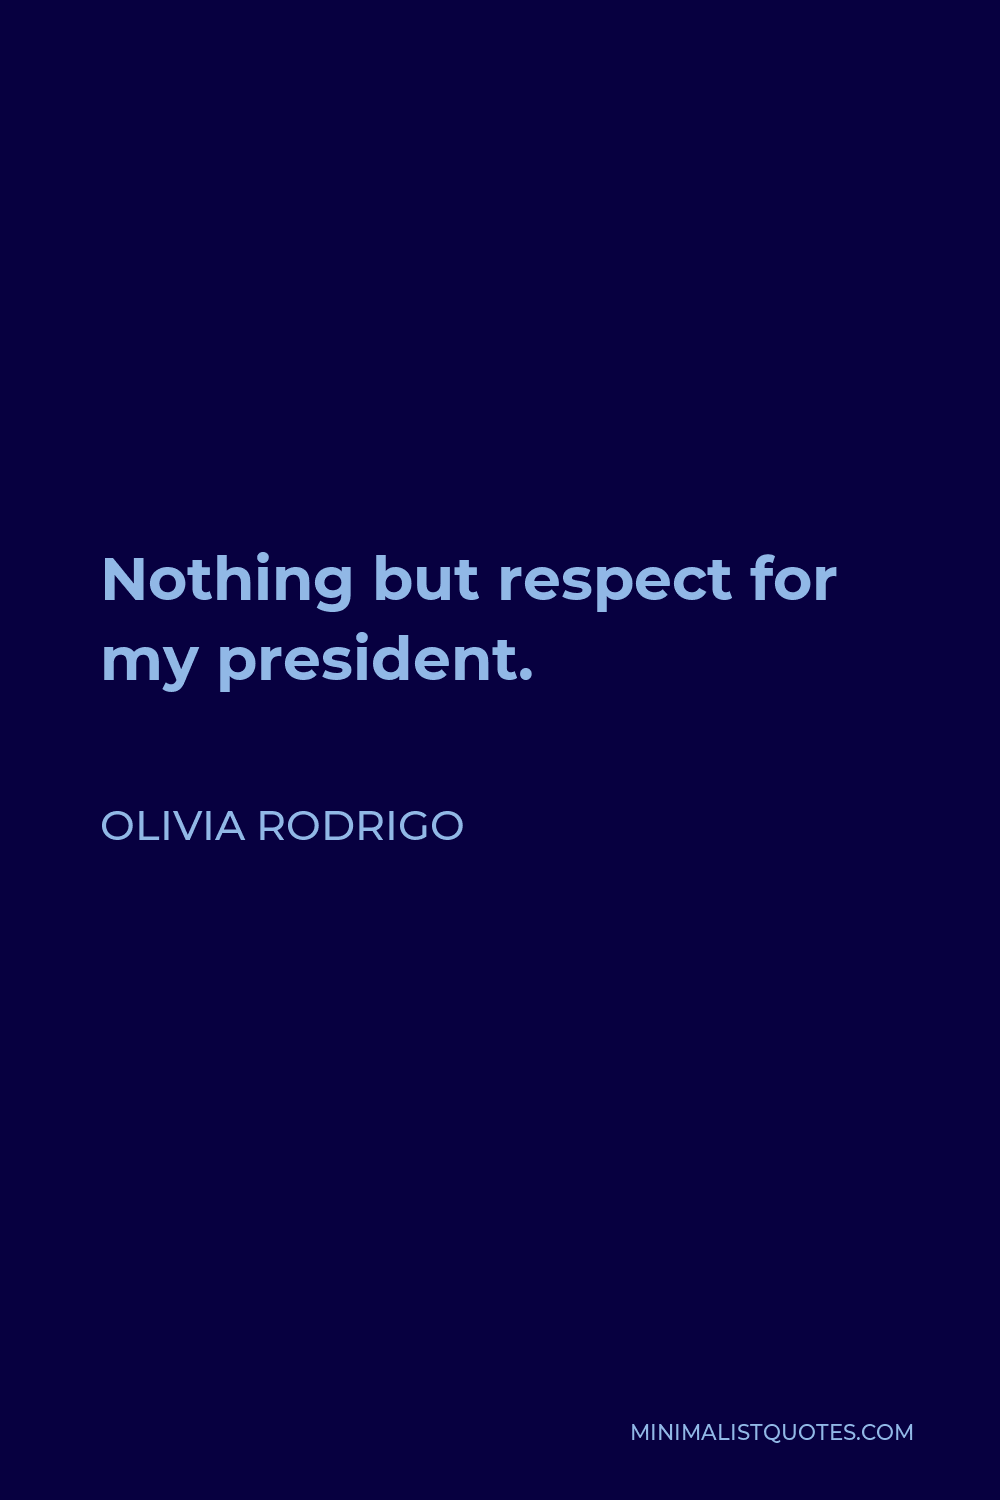 Olivia Rodrigo Quote - Nothing but respect for my president.